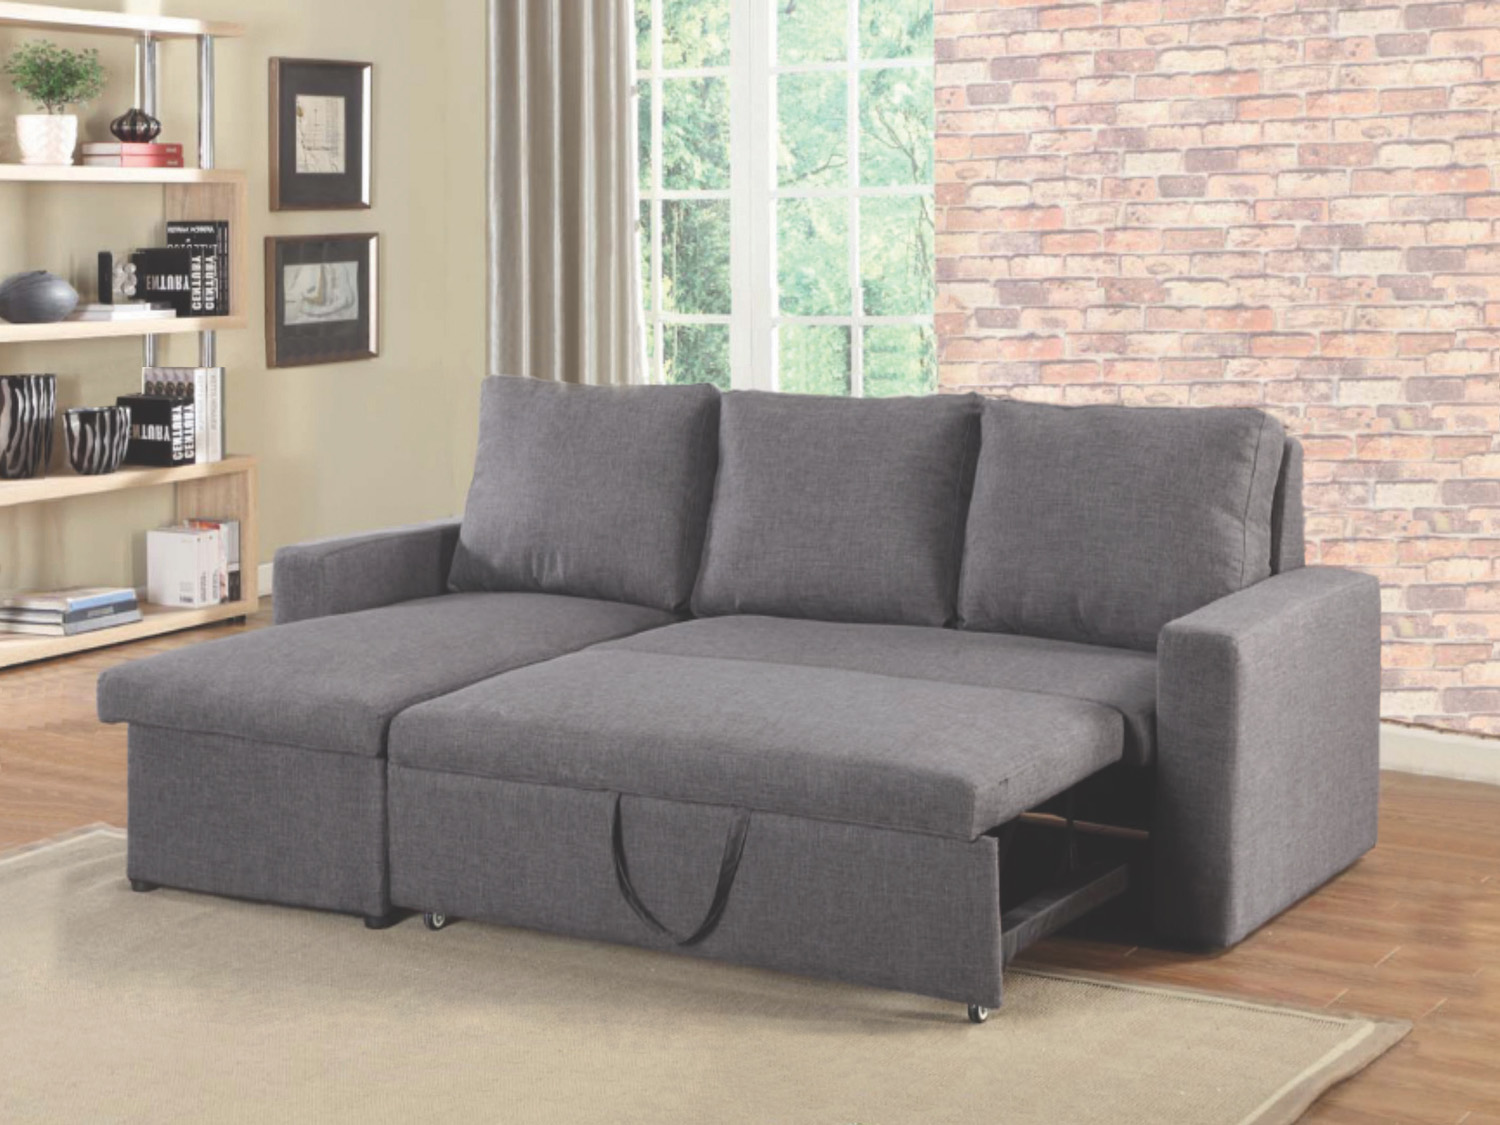 pull down single sofa bed